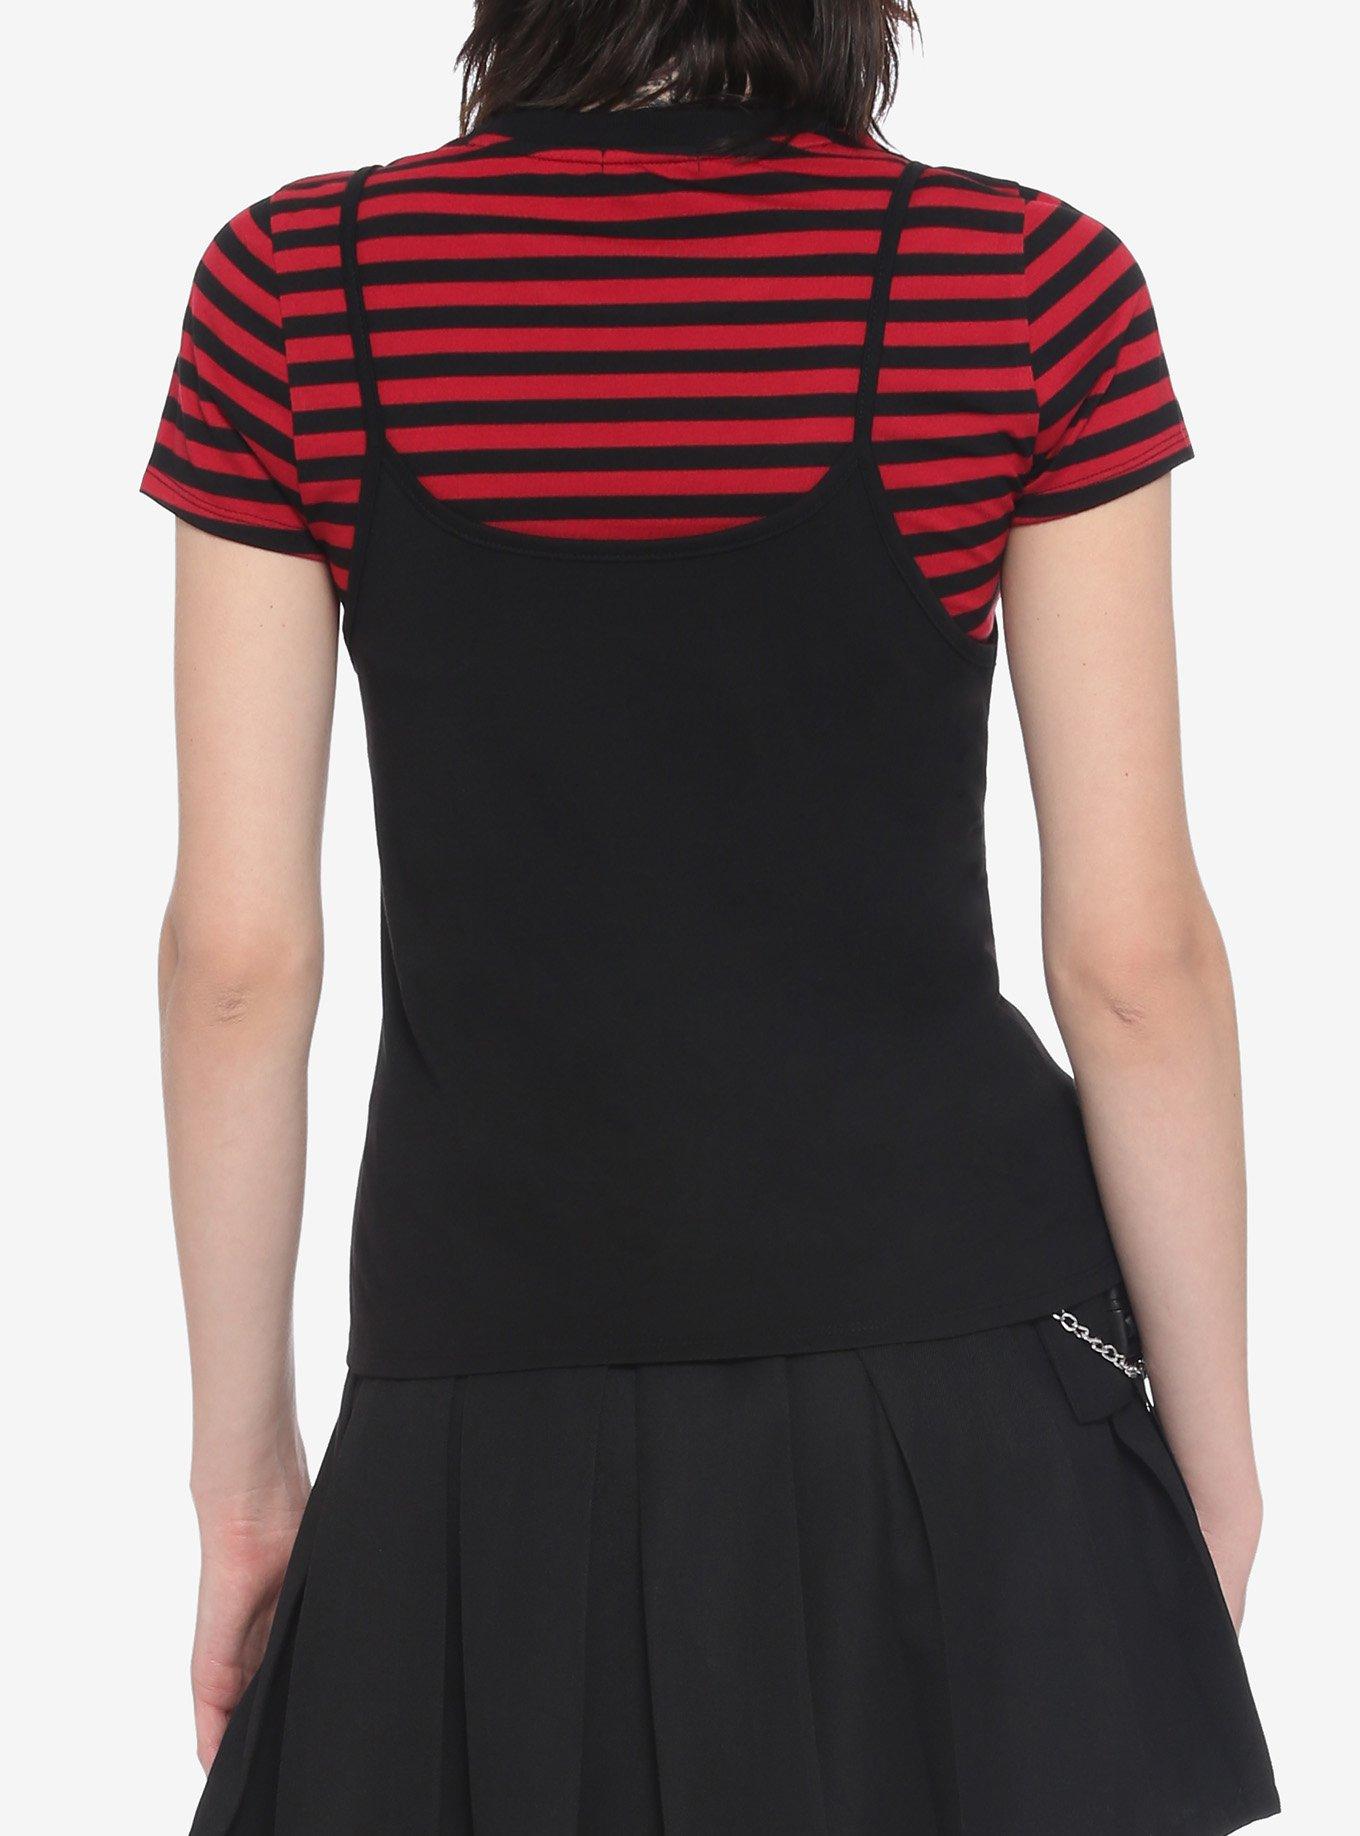 Dead Inside Black & Red Stripe Girls Strappy Tank Top With T-Shirt, STRIPES - RED, alternate